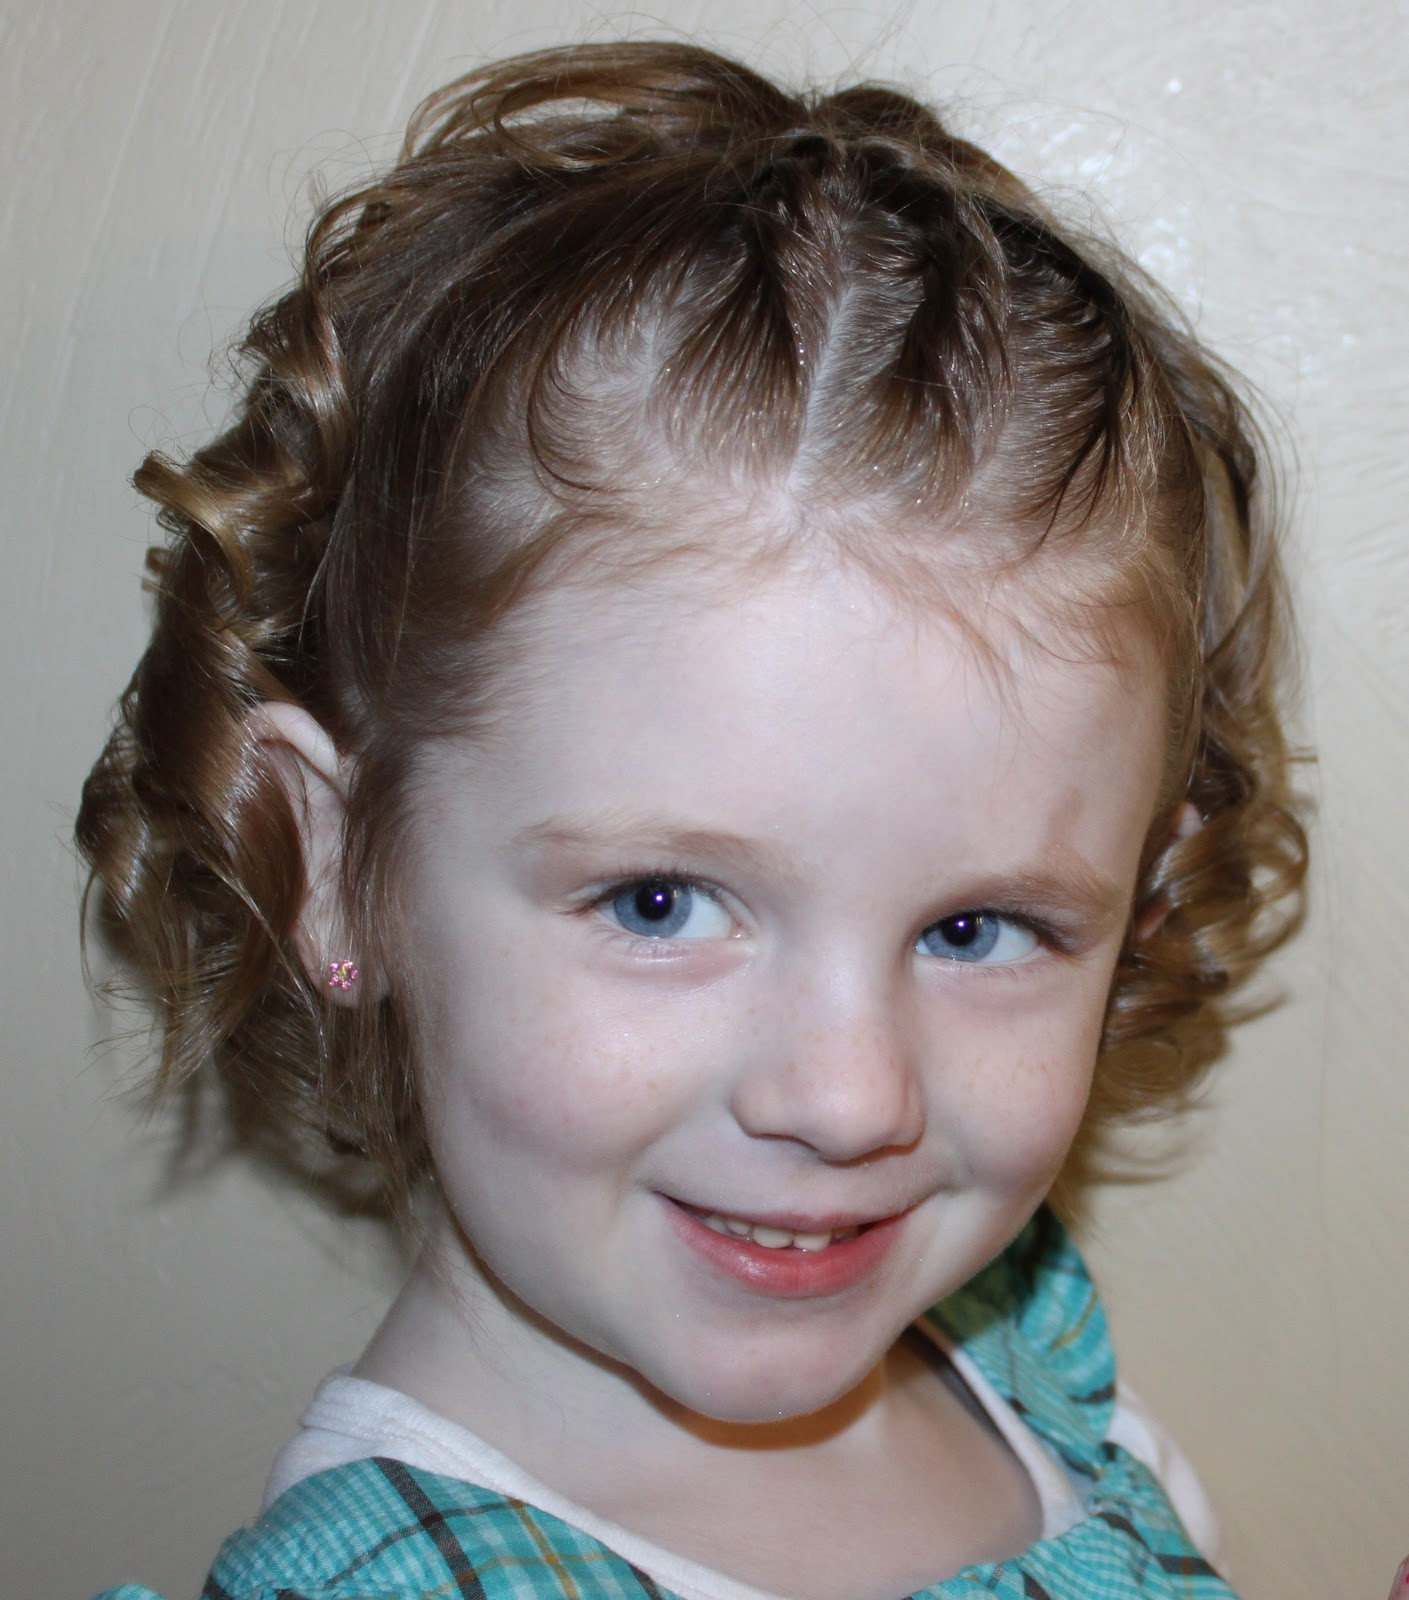 Girls Toddler Hairstyles
 Hairstyles for Girls The Wright Hair Toddler 3 rolls to